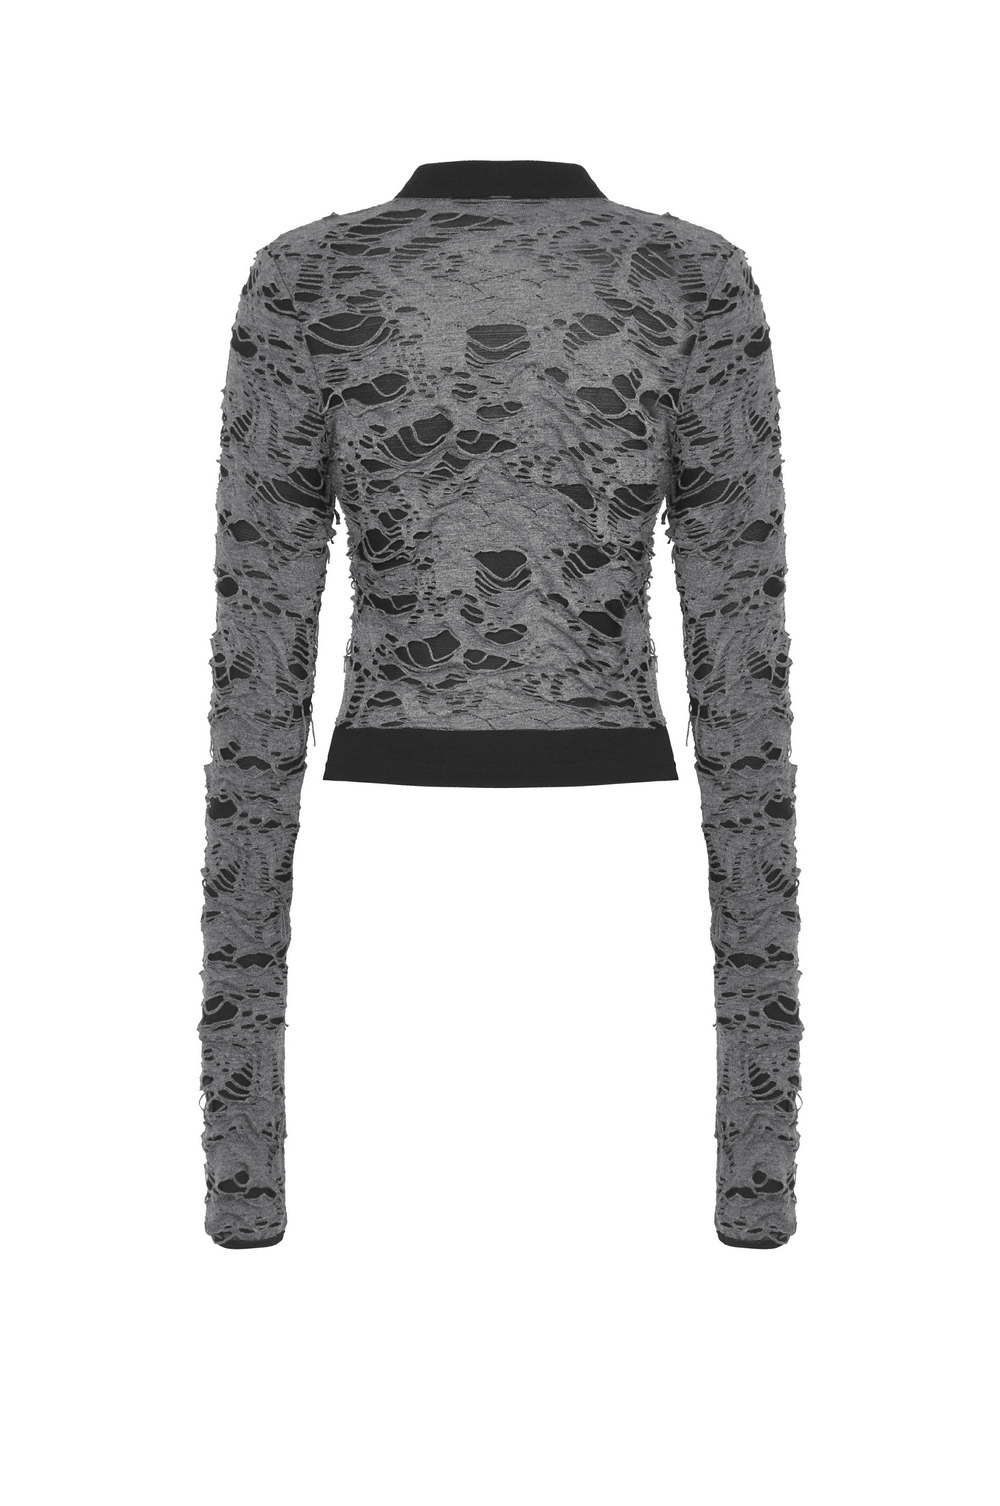 Ripped Mesh Long Sleeved Top with Metal Eyelets